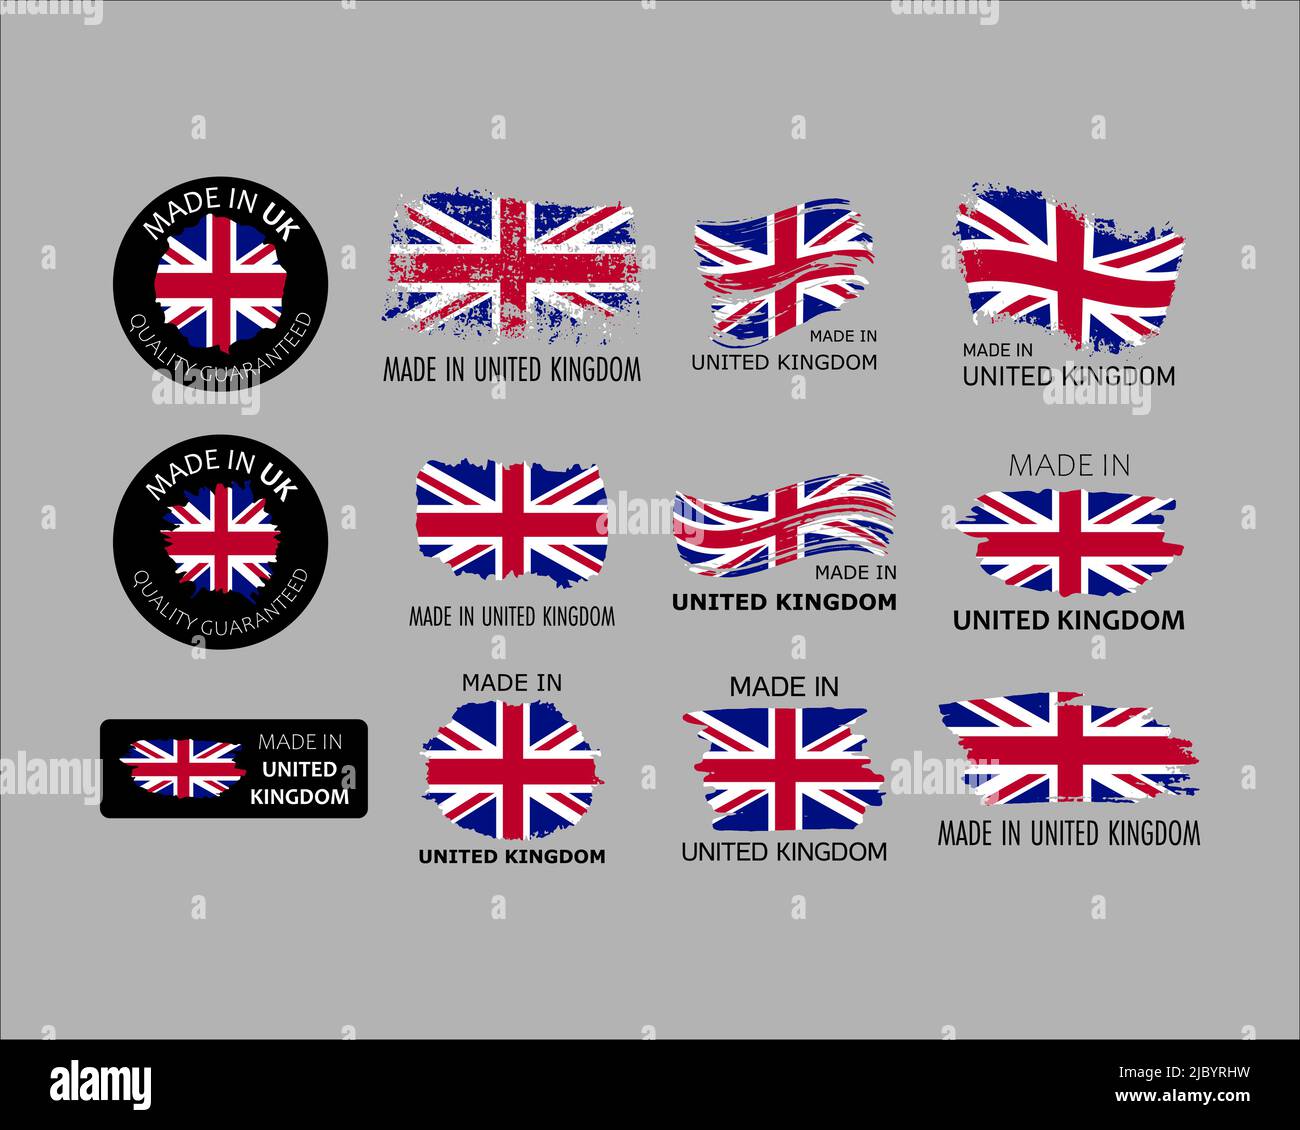 Set of stickers. Made in UK. Brush strokes shaped with British flag. Factory, manufacturing and production country concept. Design element Stock Vector